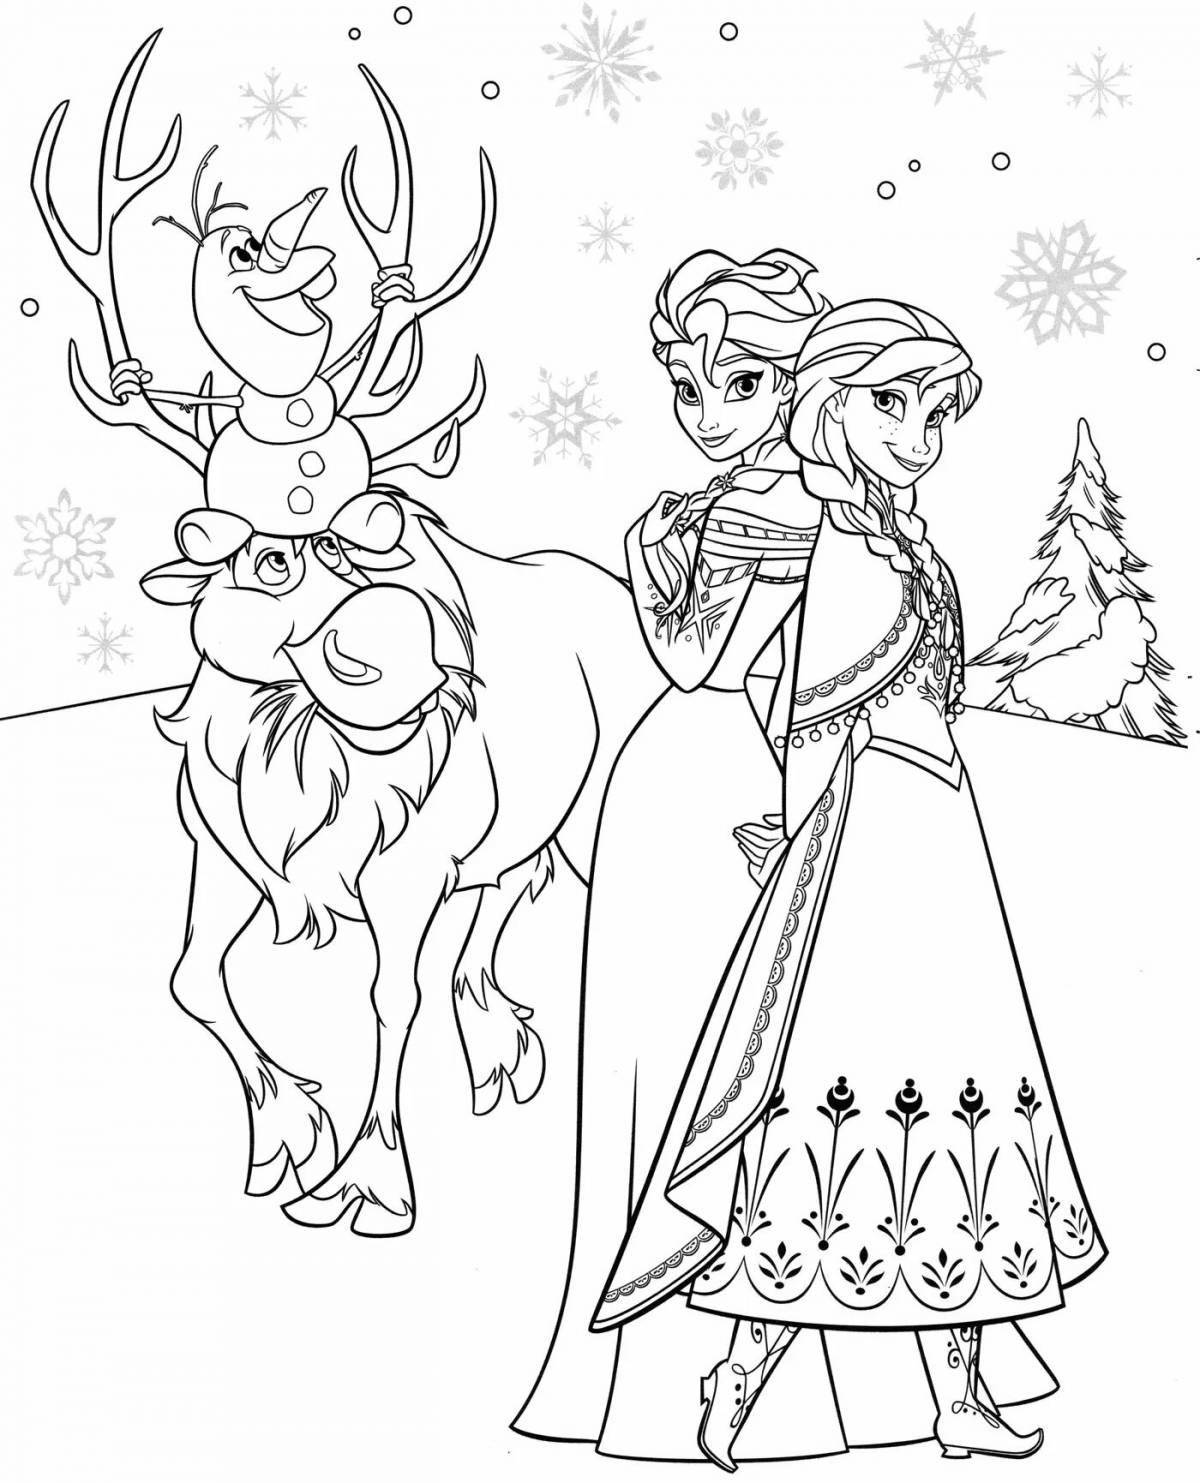 Adorable elsa coloring book for kids 6-7 years old